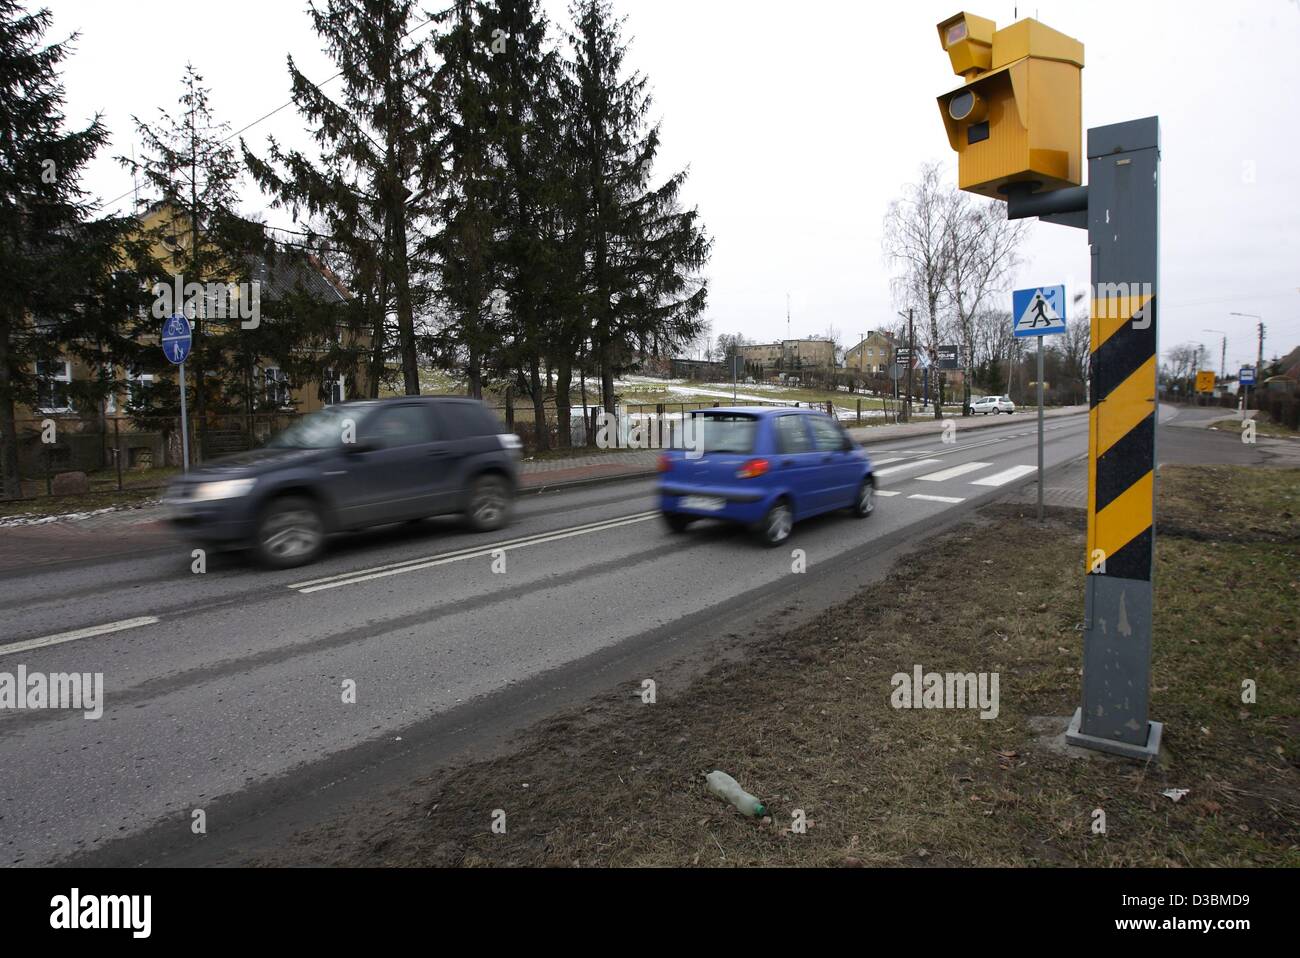 Baldram, Poland 15th, Fenruary 2013 Polish government has announced a new drive to cut the over 3,500 deaths a year on Polish roads , one of the worst road safety records in the EU , which includes placing more radar speed cameras at accident black spots. Pictured : new speed camera in village of Baldarm, Central Poland Stock Photo